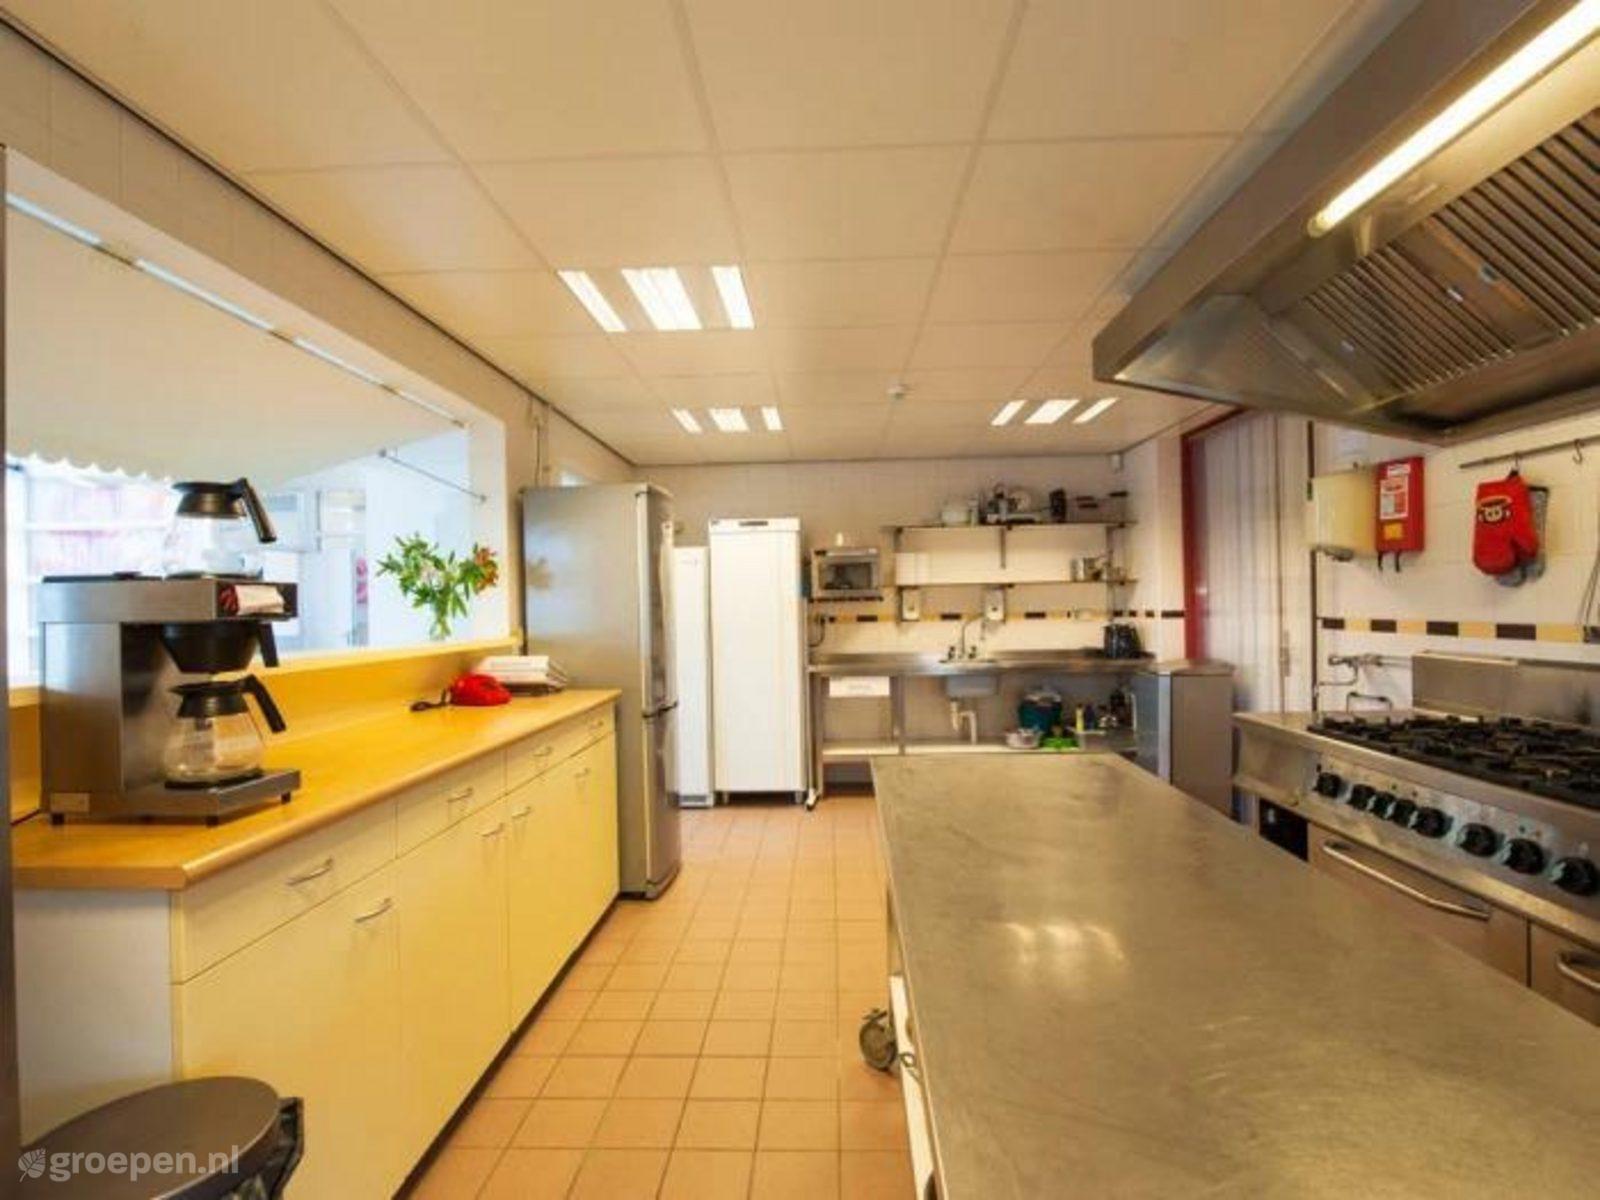 Group accommodation Almere